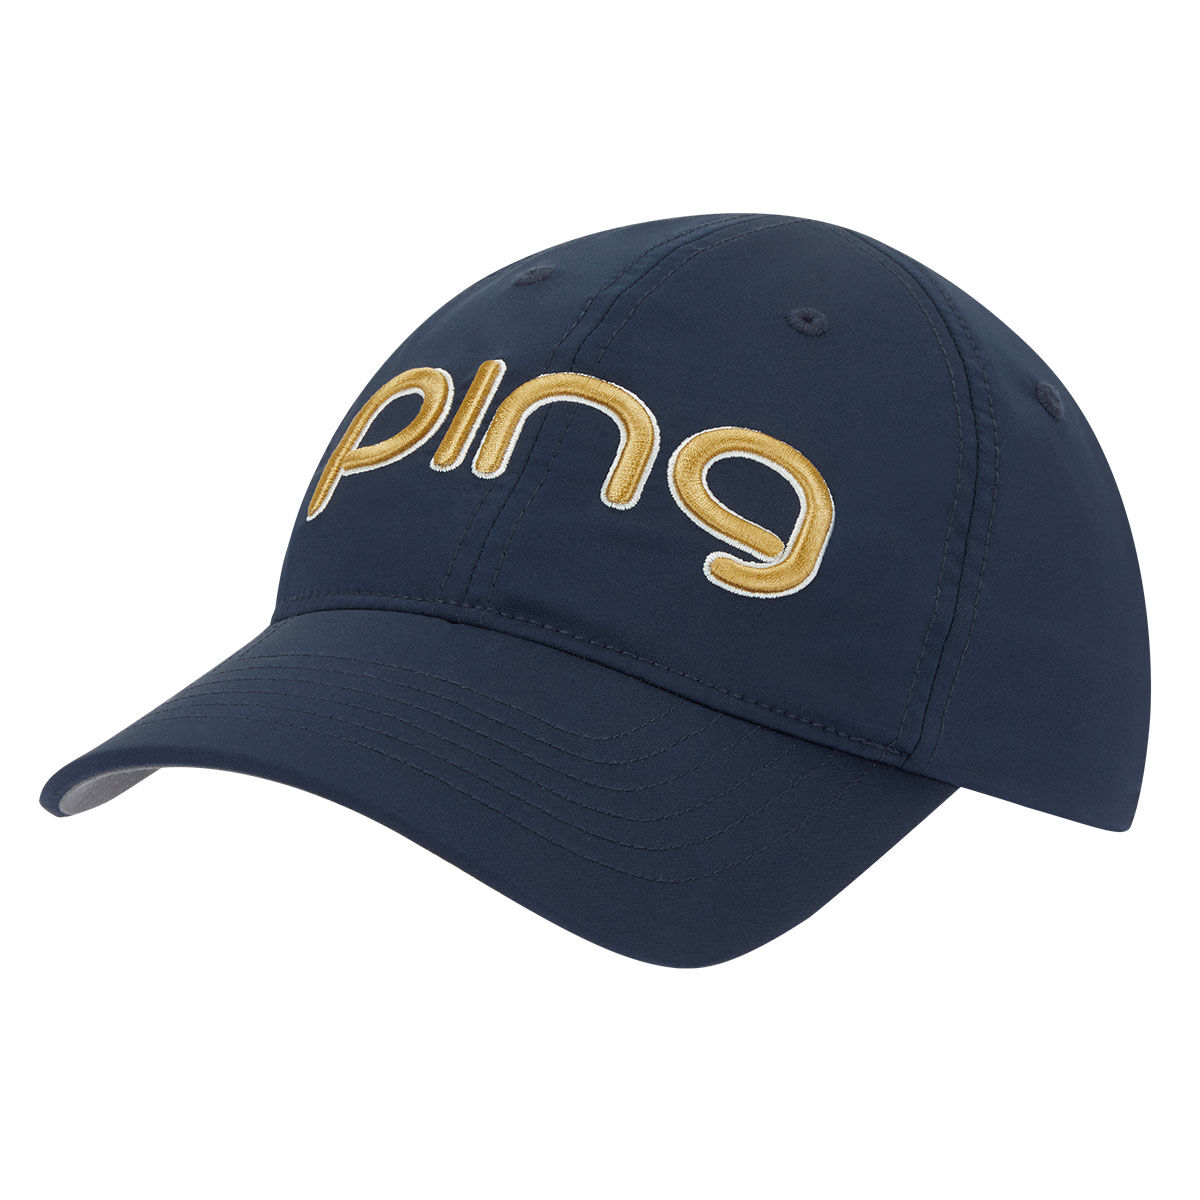 PING Women’s Navy Blue and Gold Embroidered G Le3 Tour Delta Golf Cap | American Golf, One Size